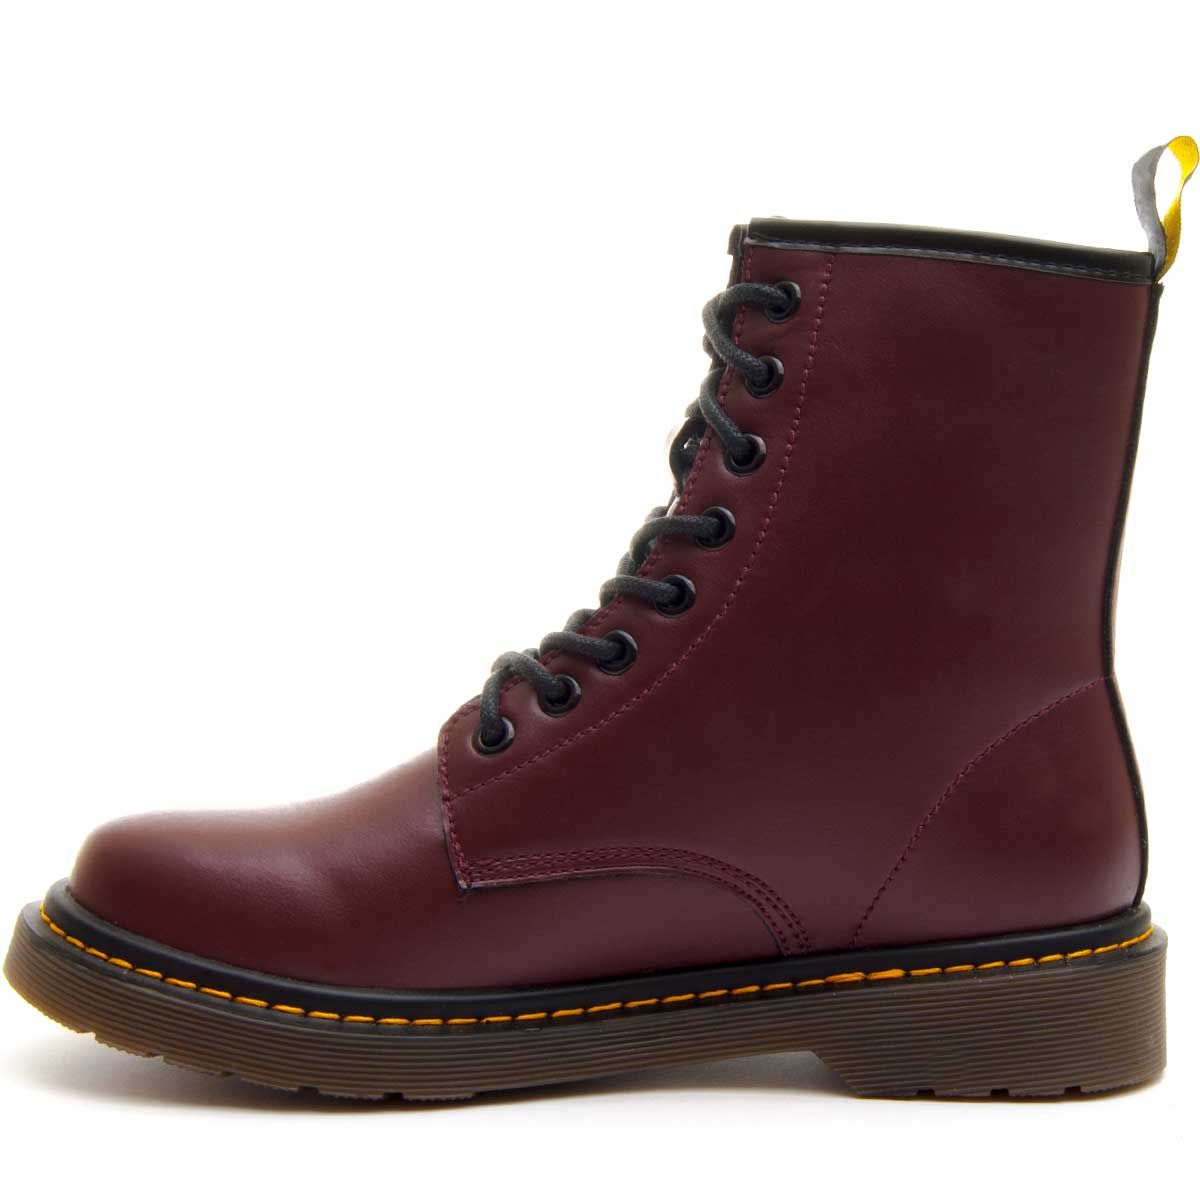 Are you one of those who like the original essence? Well with the strange martinace. Both in its Bordeaux and Black version is ideal thanks to follow the original line of material tones and seams of yellow thread and brown caramel floor. No doubt you will achieve a very radical and personal style with a boot like this. Easy to clean the floor is non-slip. Comfortable Hormo. Previous and posterior buttresses with rear pull to facilitate stroke. Collection by Azarey.